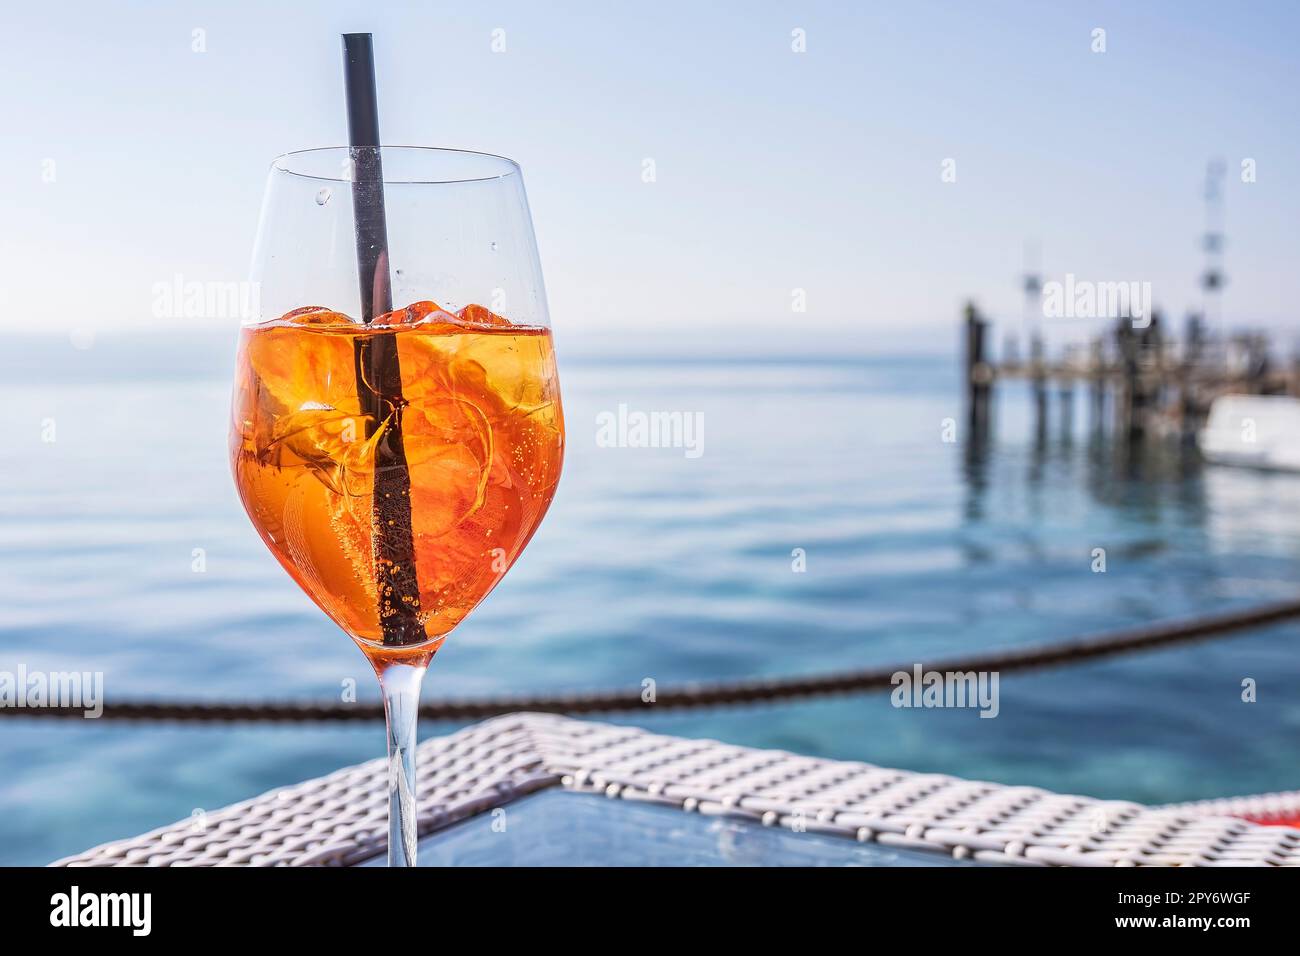 Cheers to good times: Elegant glassware on a seafront bar table Stock Photo